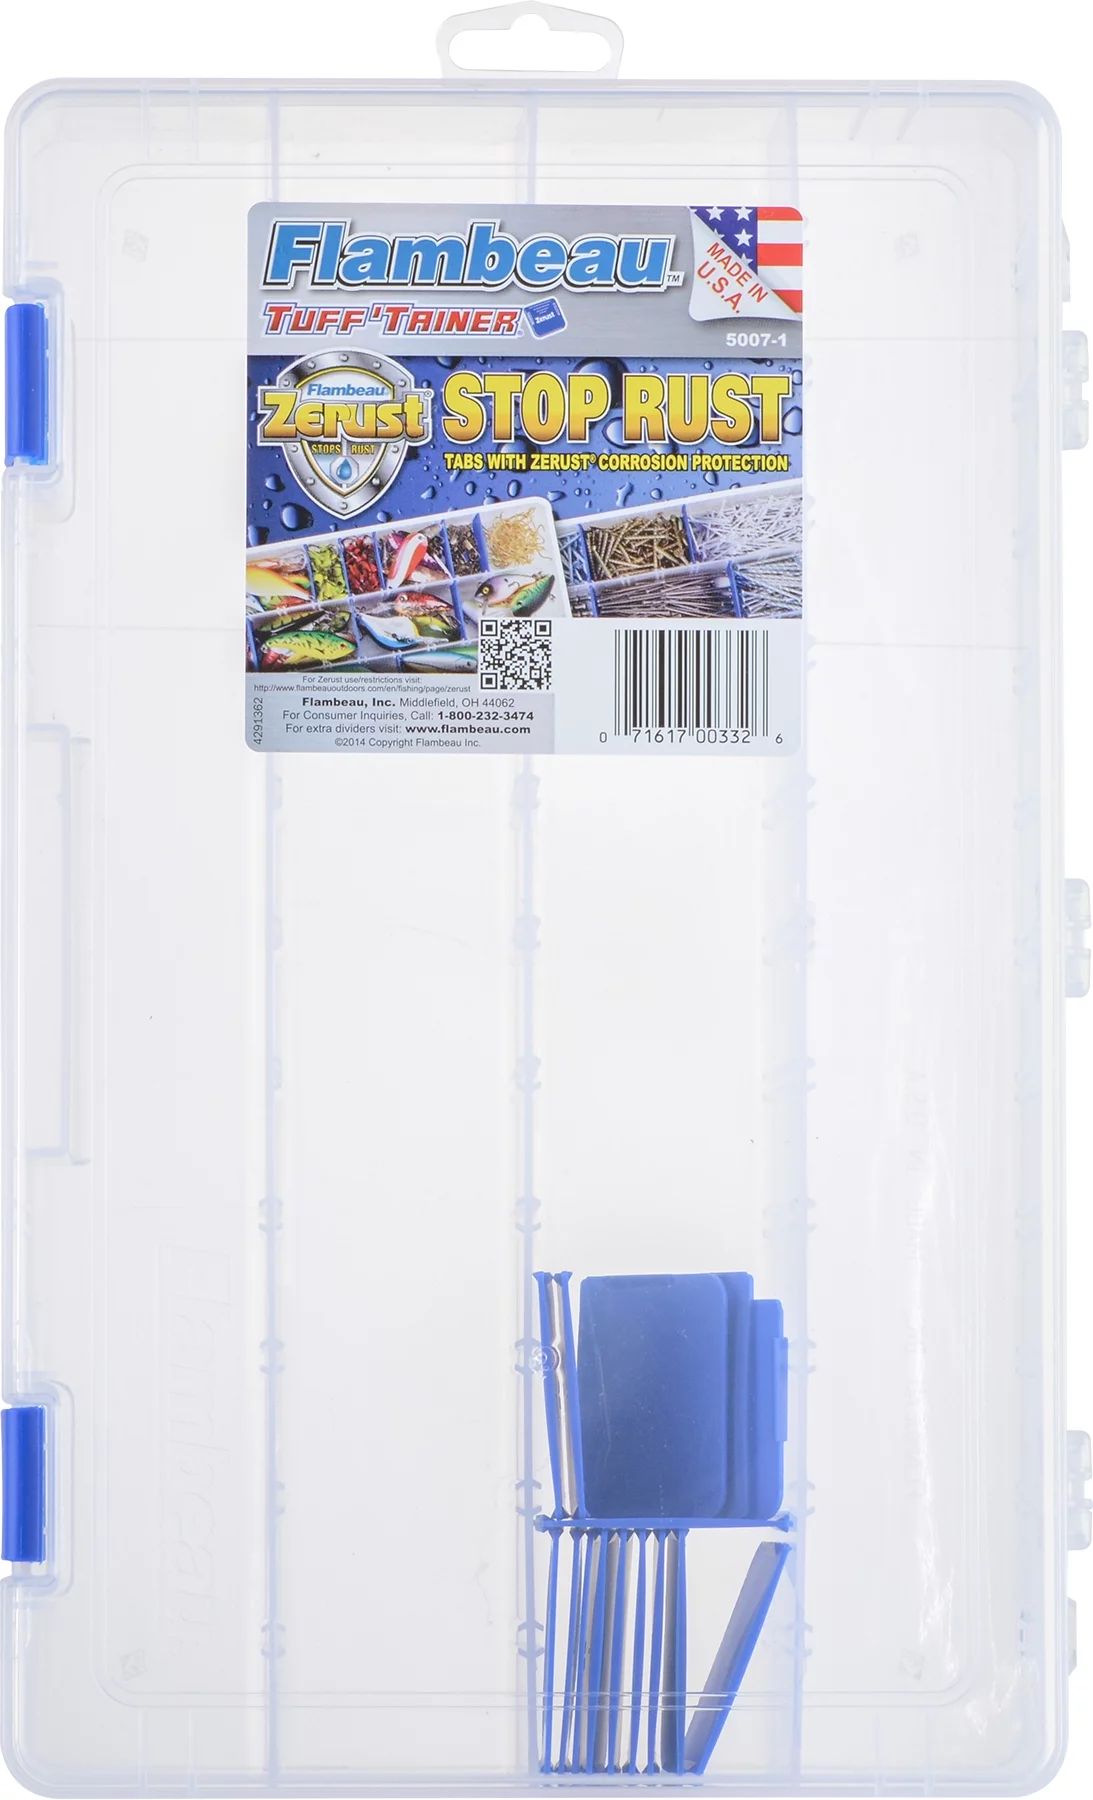 5007 Tuff Tainer® - 36 Compartments (Includes (18) Zerust® Dividers) | Walmart (US)